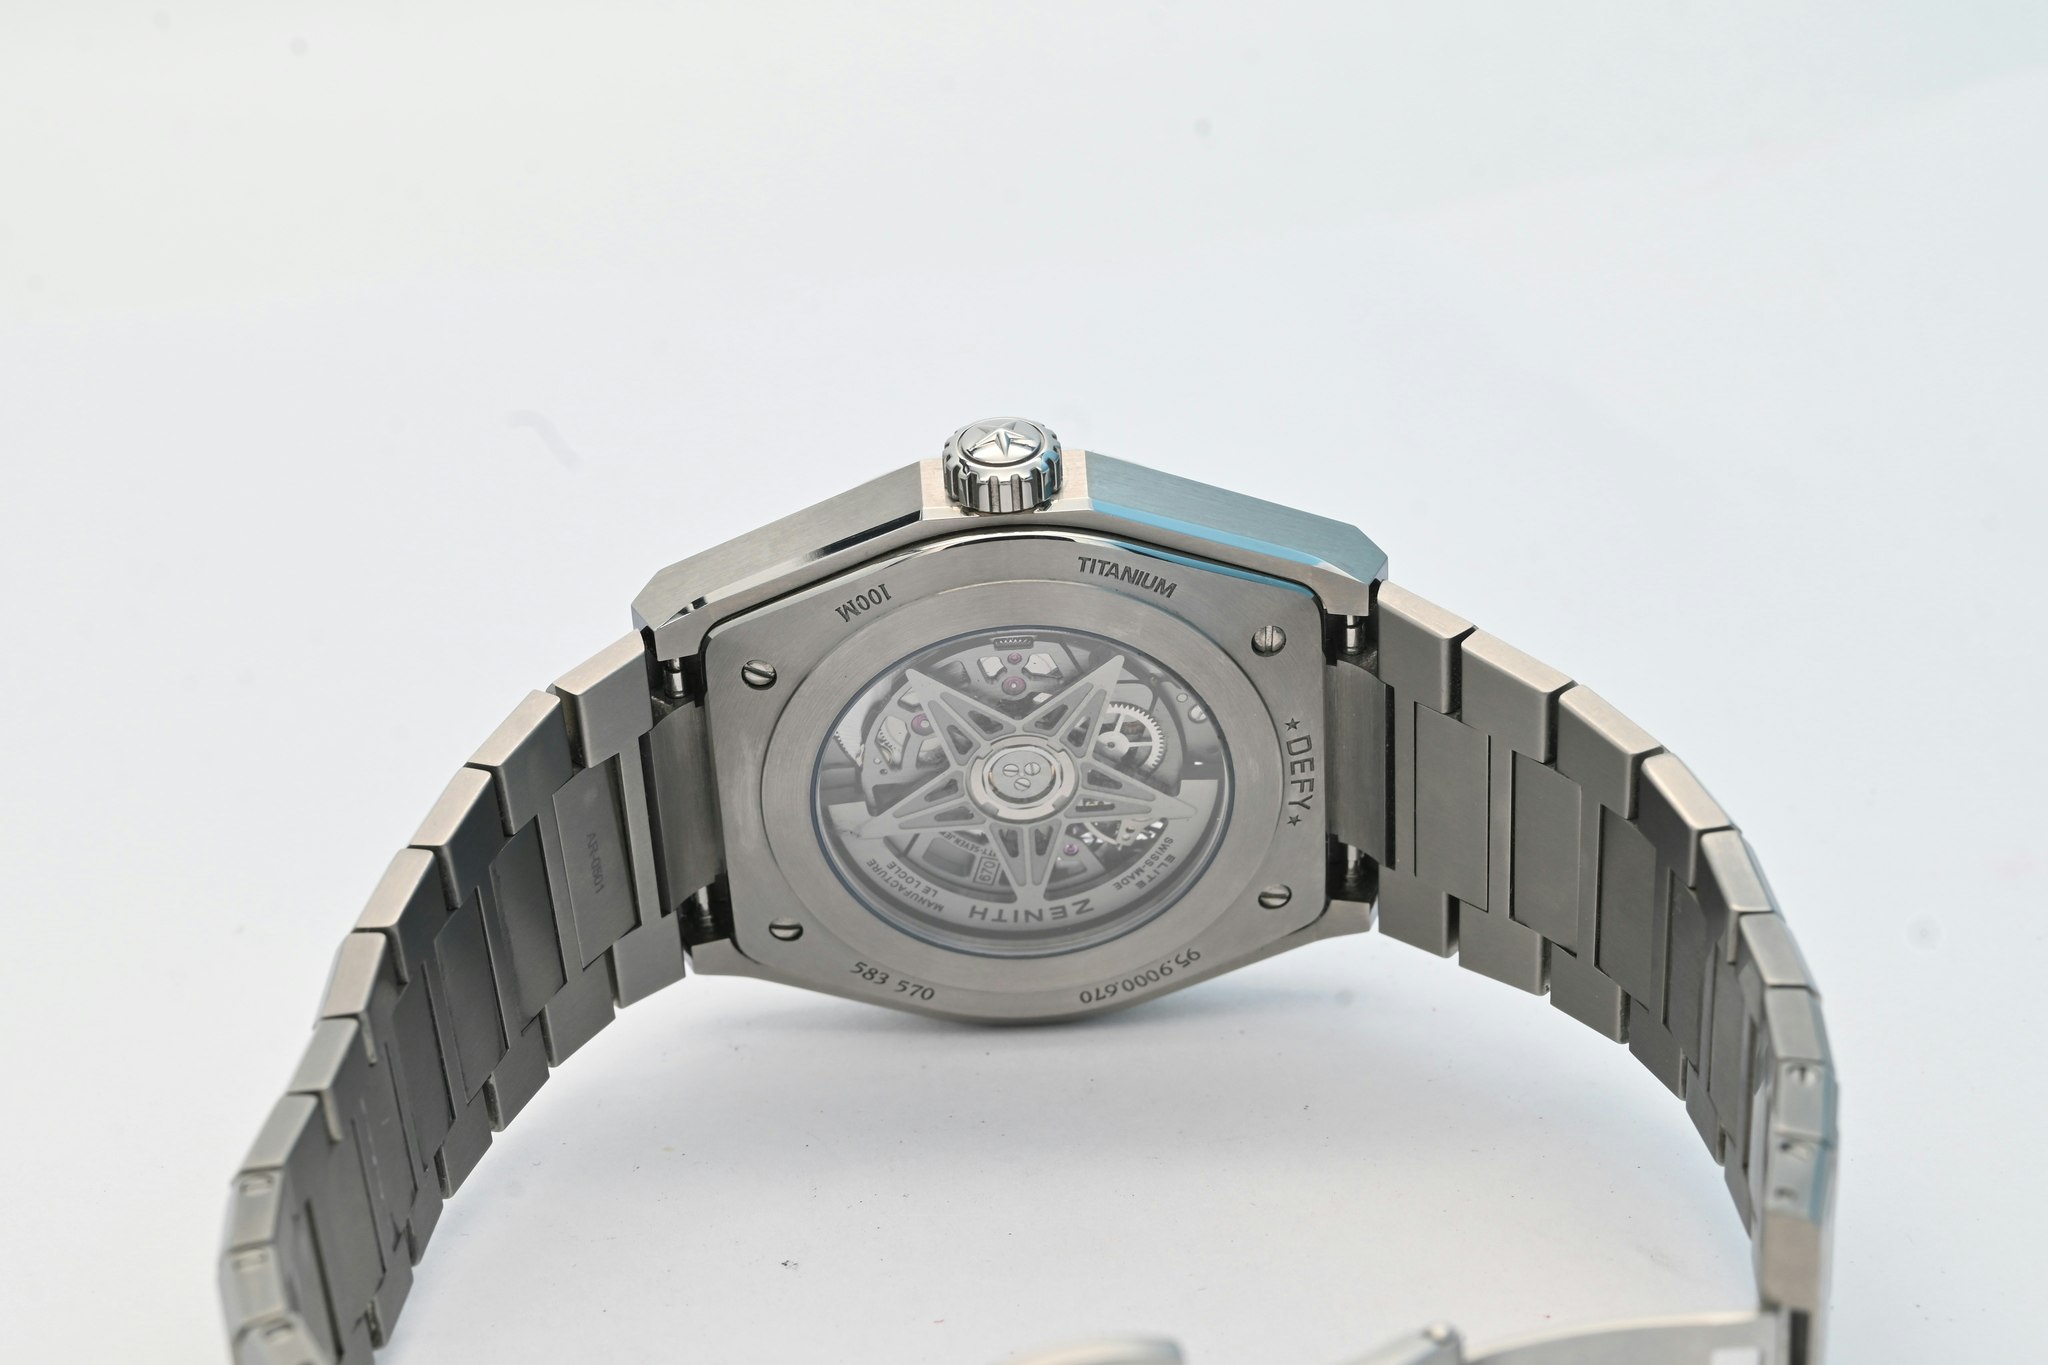 Sold: Zenith Defy Classic Skeleton 2023 Mint condition Box&paper ref. 95.9000.670 - 713